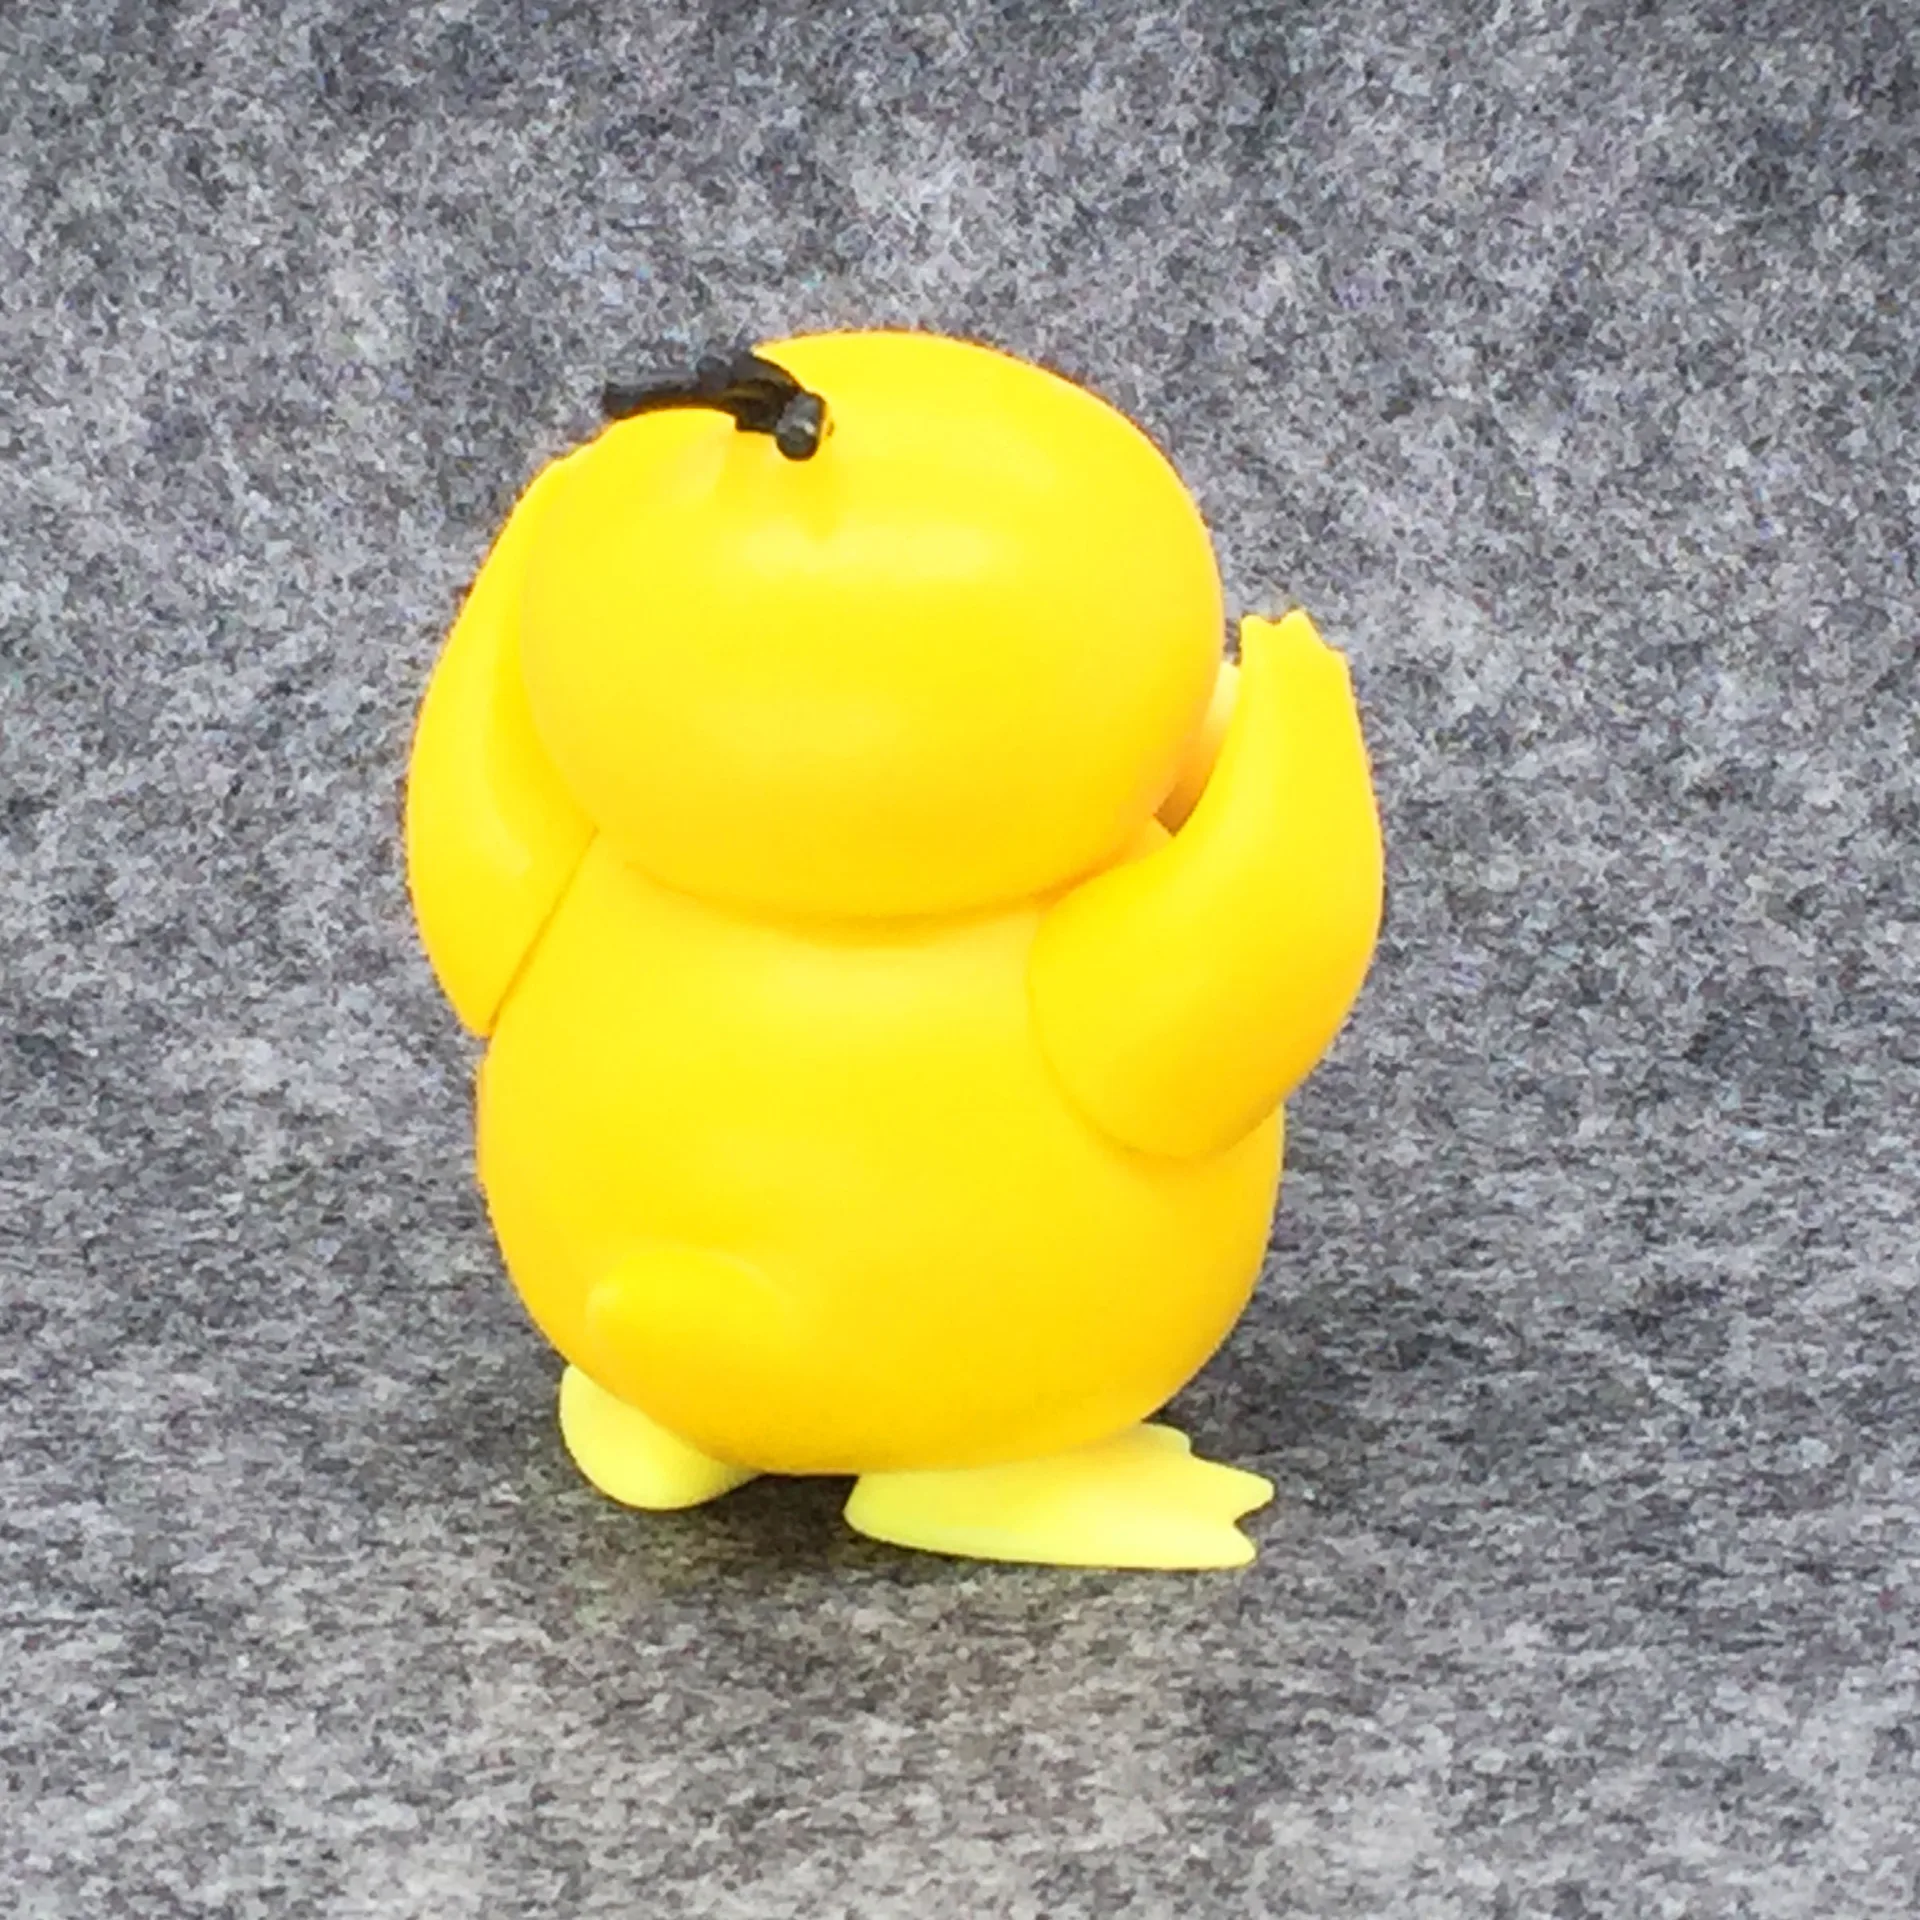 Takara Tomy Pokemon Detective pikachu Psyduck Mewtwo Bulbasaur Squirtle Eevee anime action& toy figures model